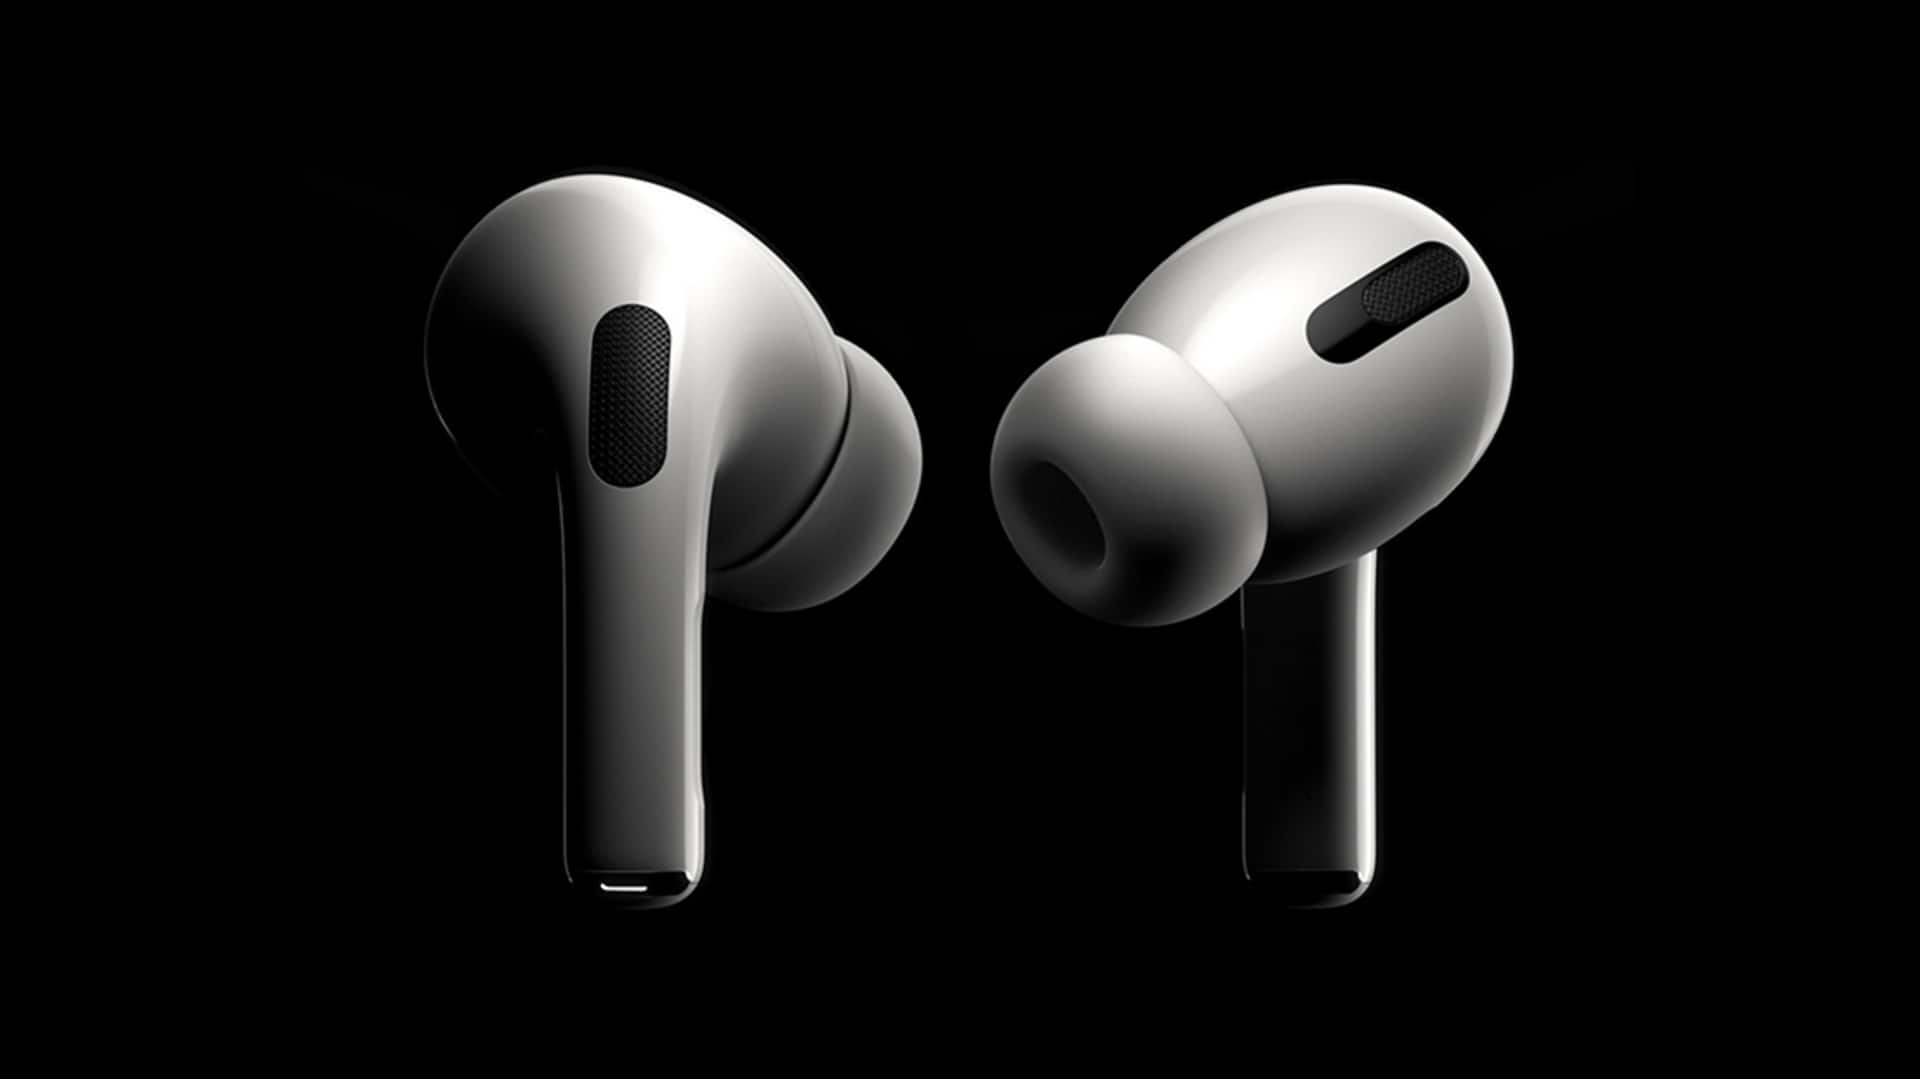 Apple's next-generation AirPods Pro could offer health monitoring, Type-C port